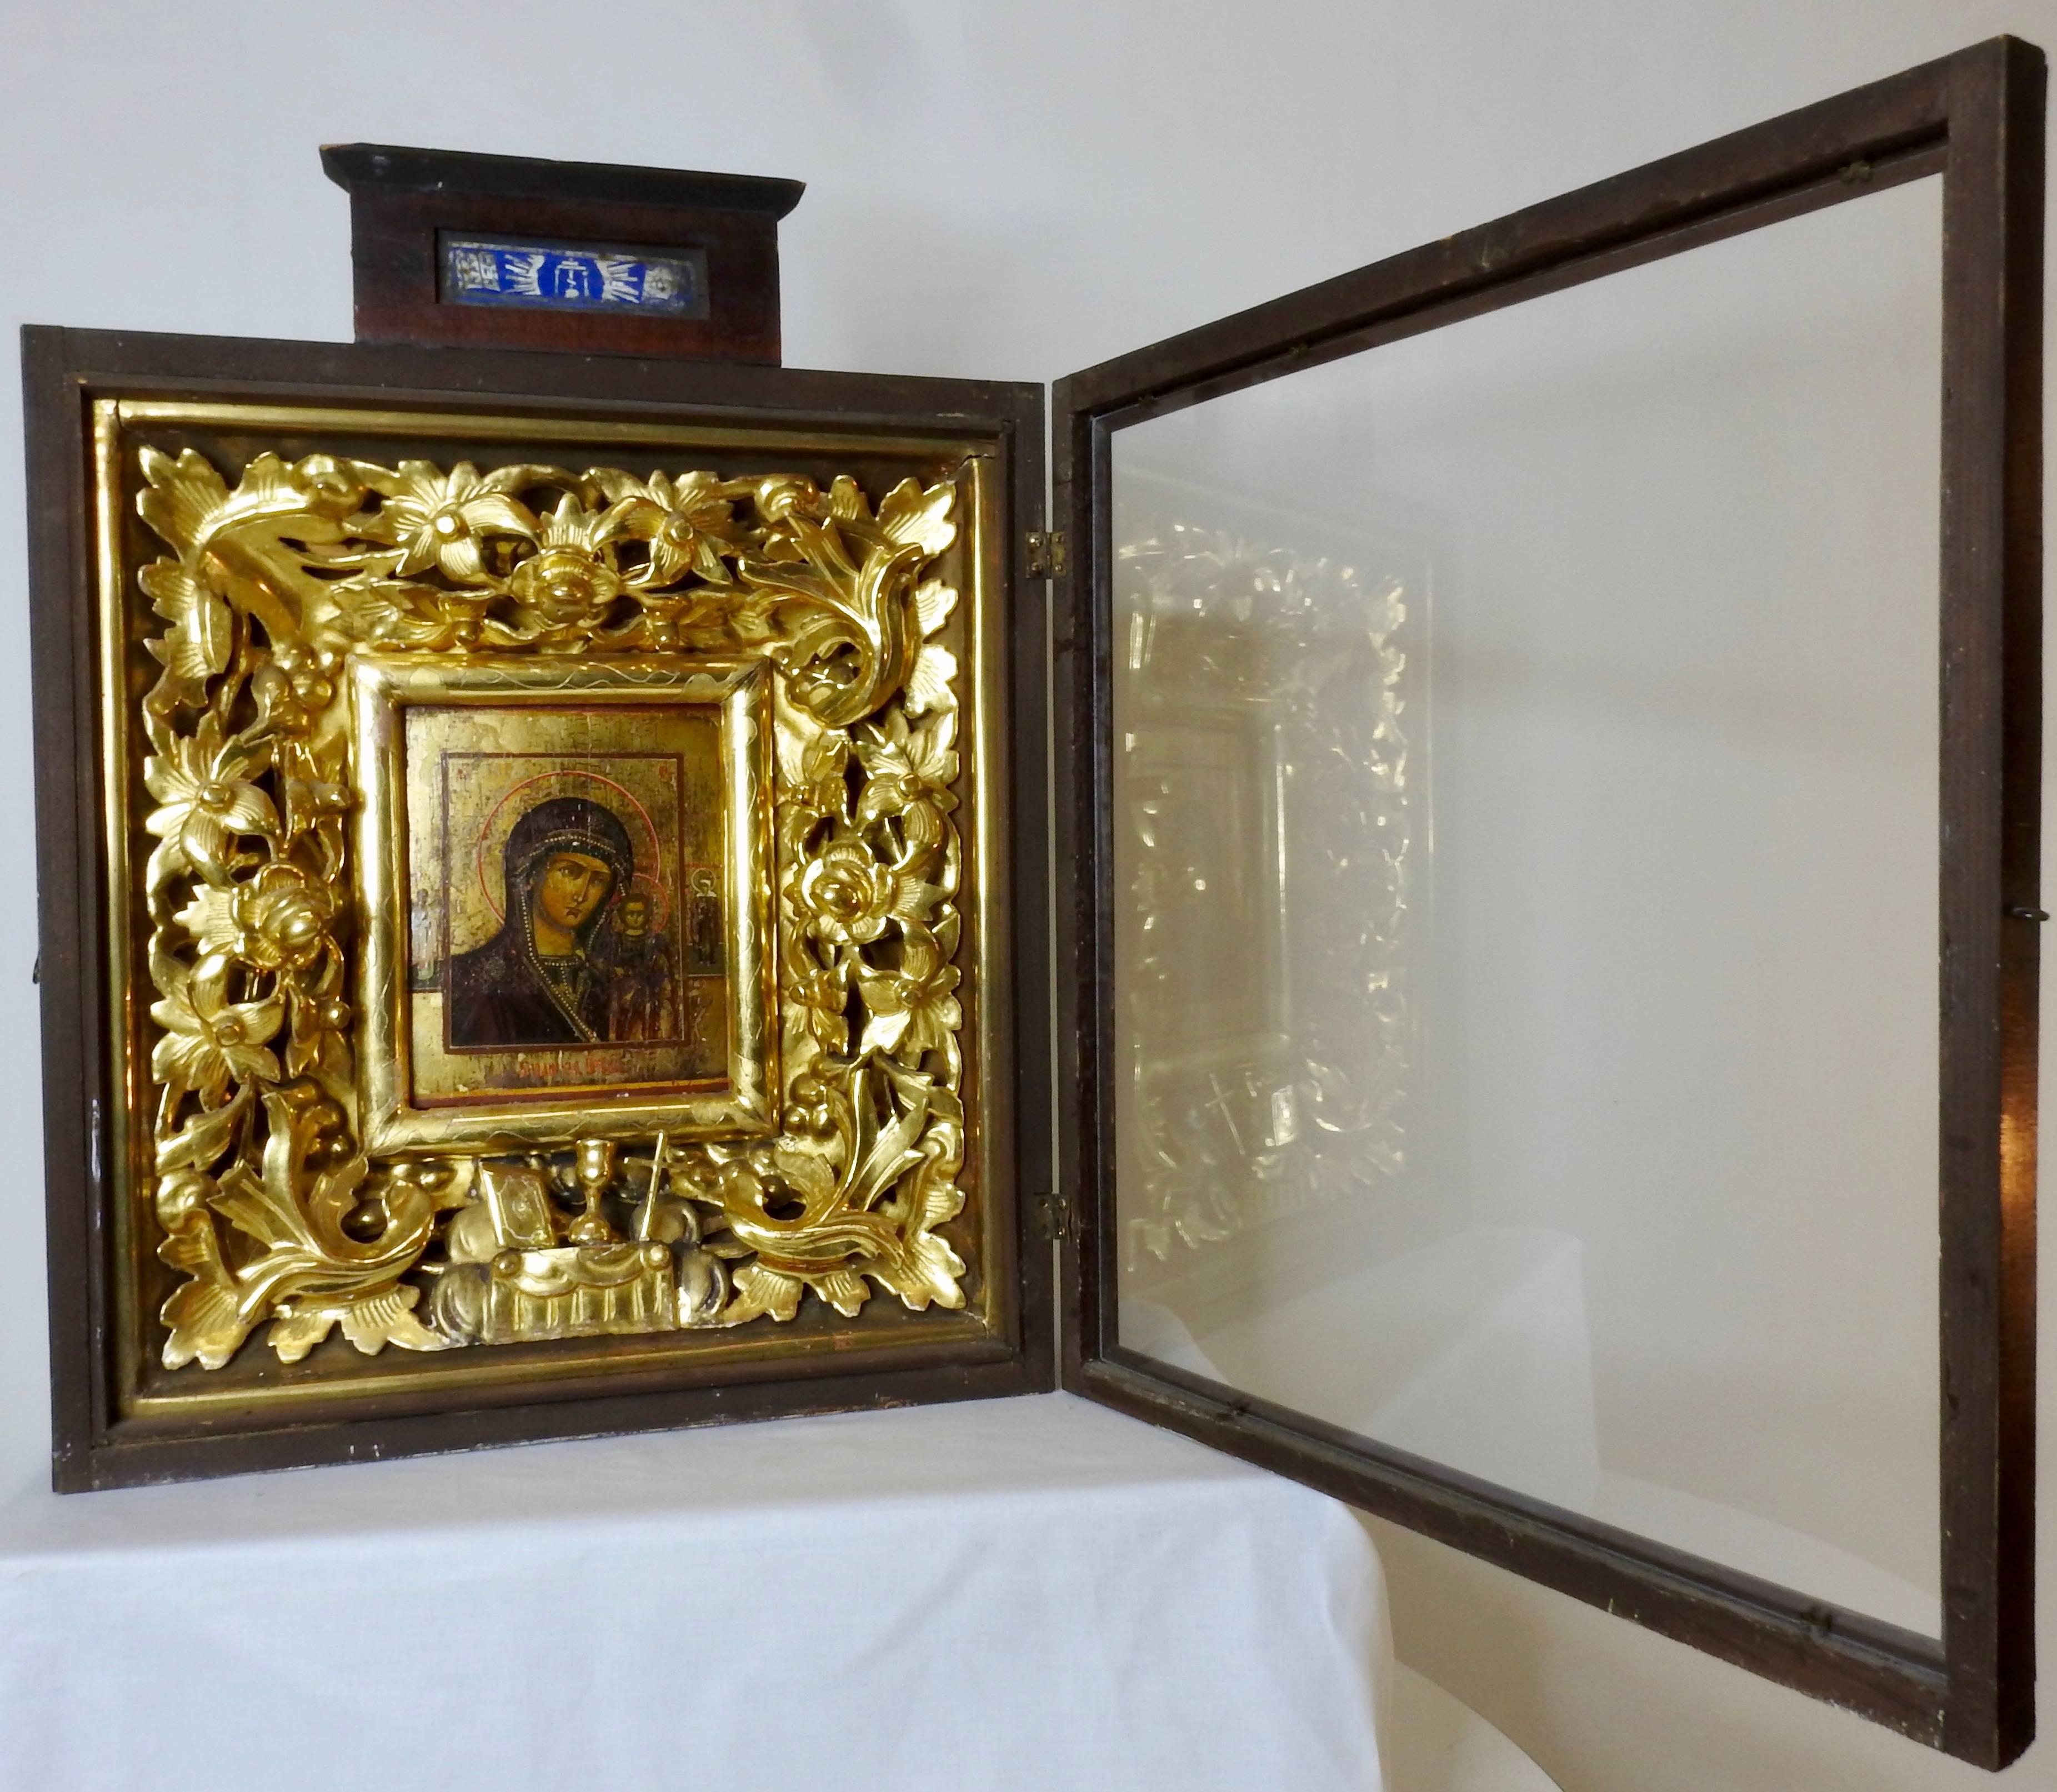 Rare Russian Religious icon from the 19th century. Framed inside a shadowbox made of veneered mahogany. Elaborate carved giltwood surrounds the painting of a saint with a child. Features flowers and leaves in an elaborate design. Painting is done on